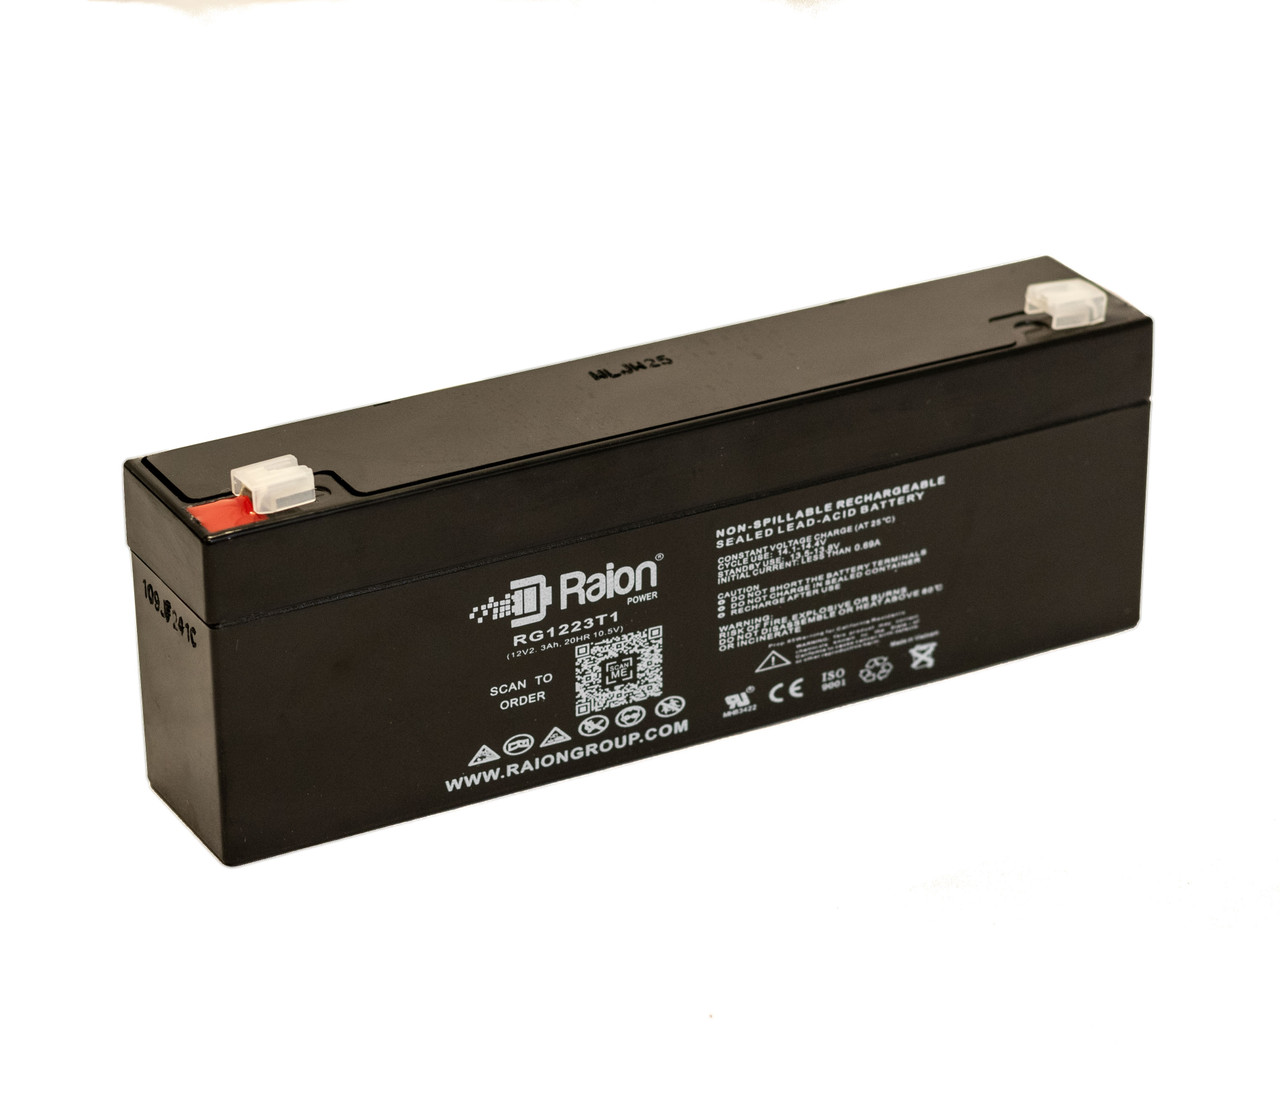 Raion Power RG1223T1 Replacement Battery for Nivec Urodynamic Flometer NV3658